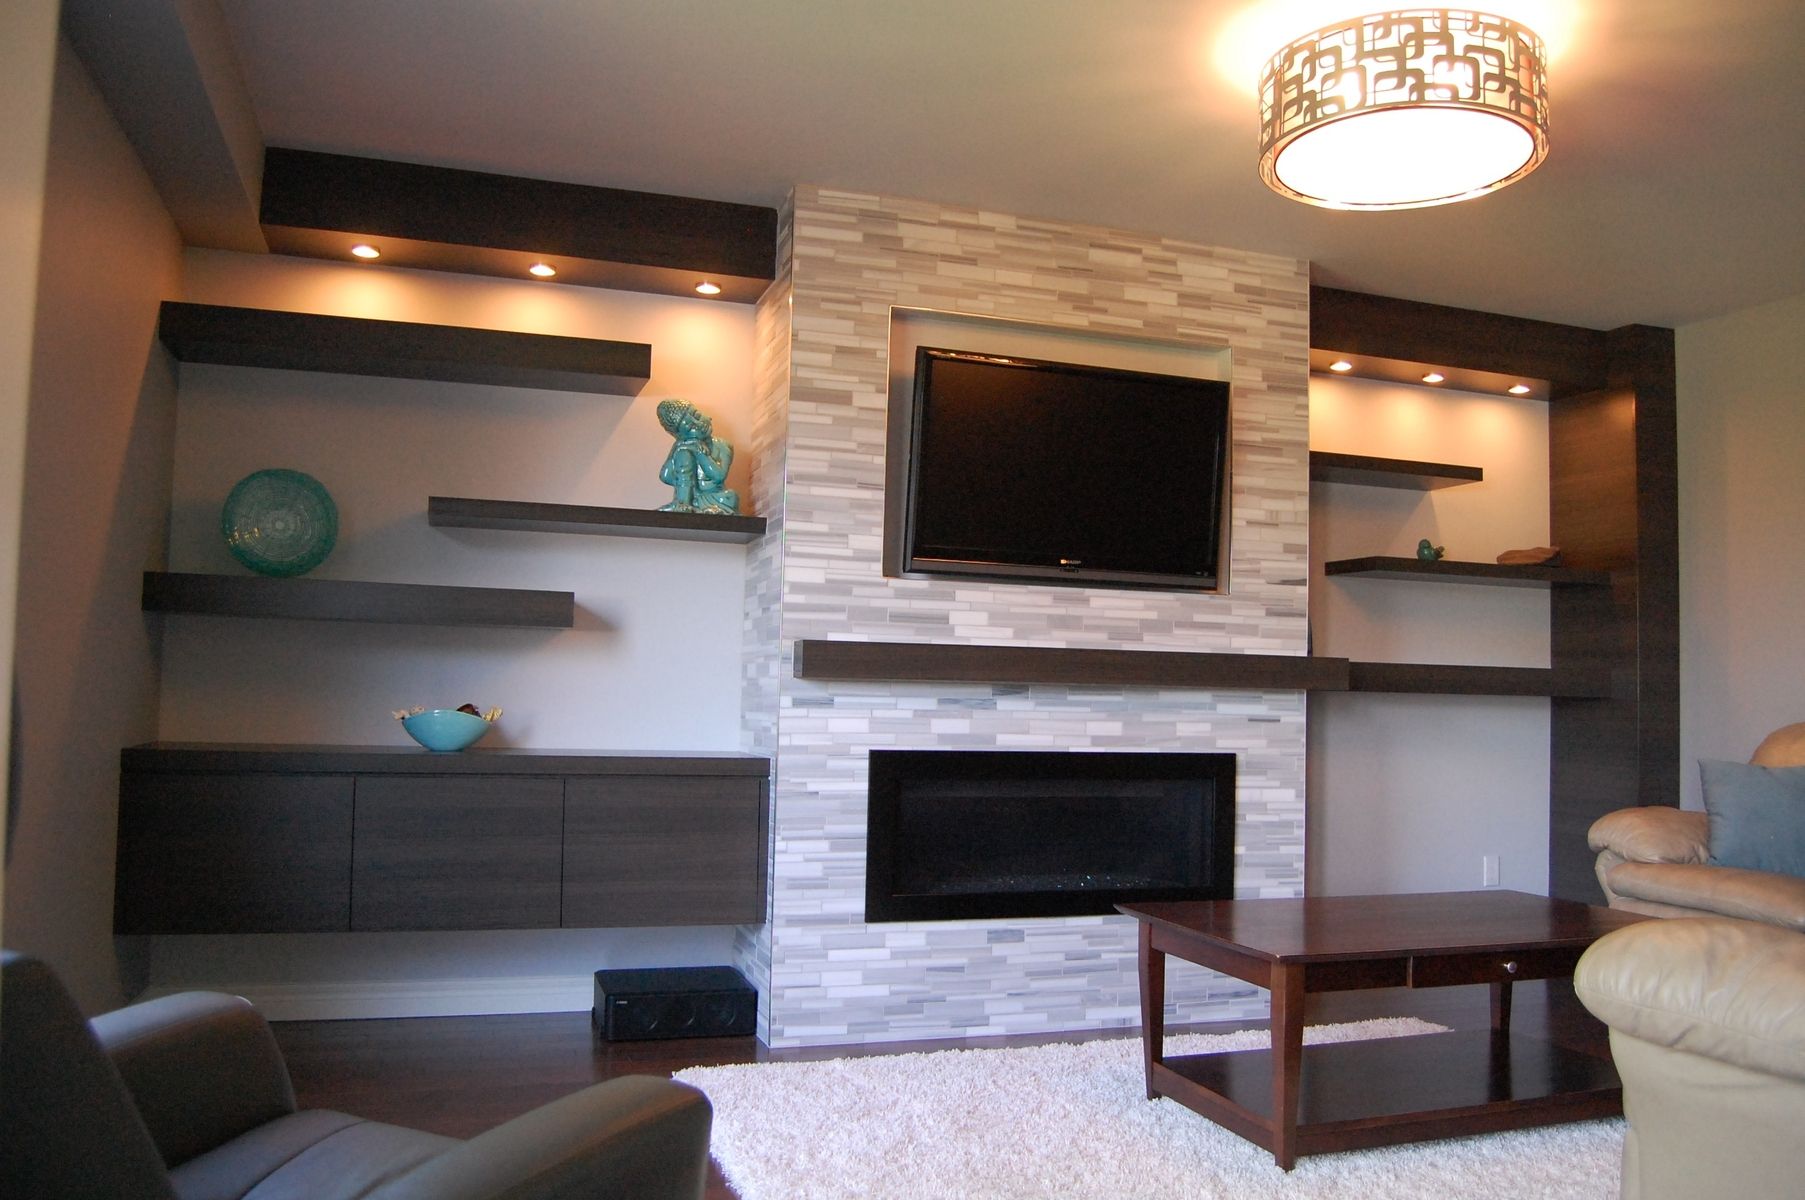 Fireplace Entertainment Center for 65 Inch Tv Fresh Custom Modern Wall Unit Made Pletely From A Printed